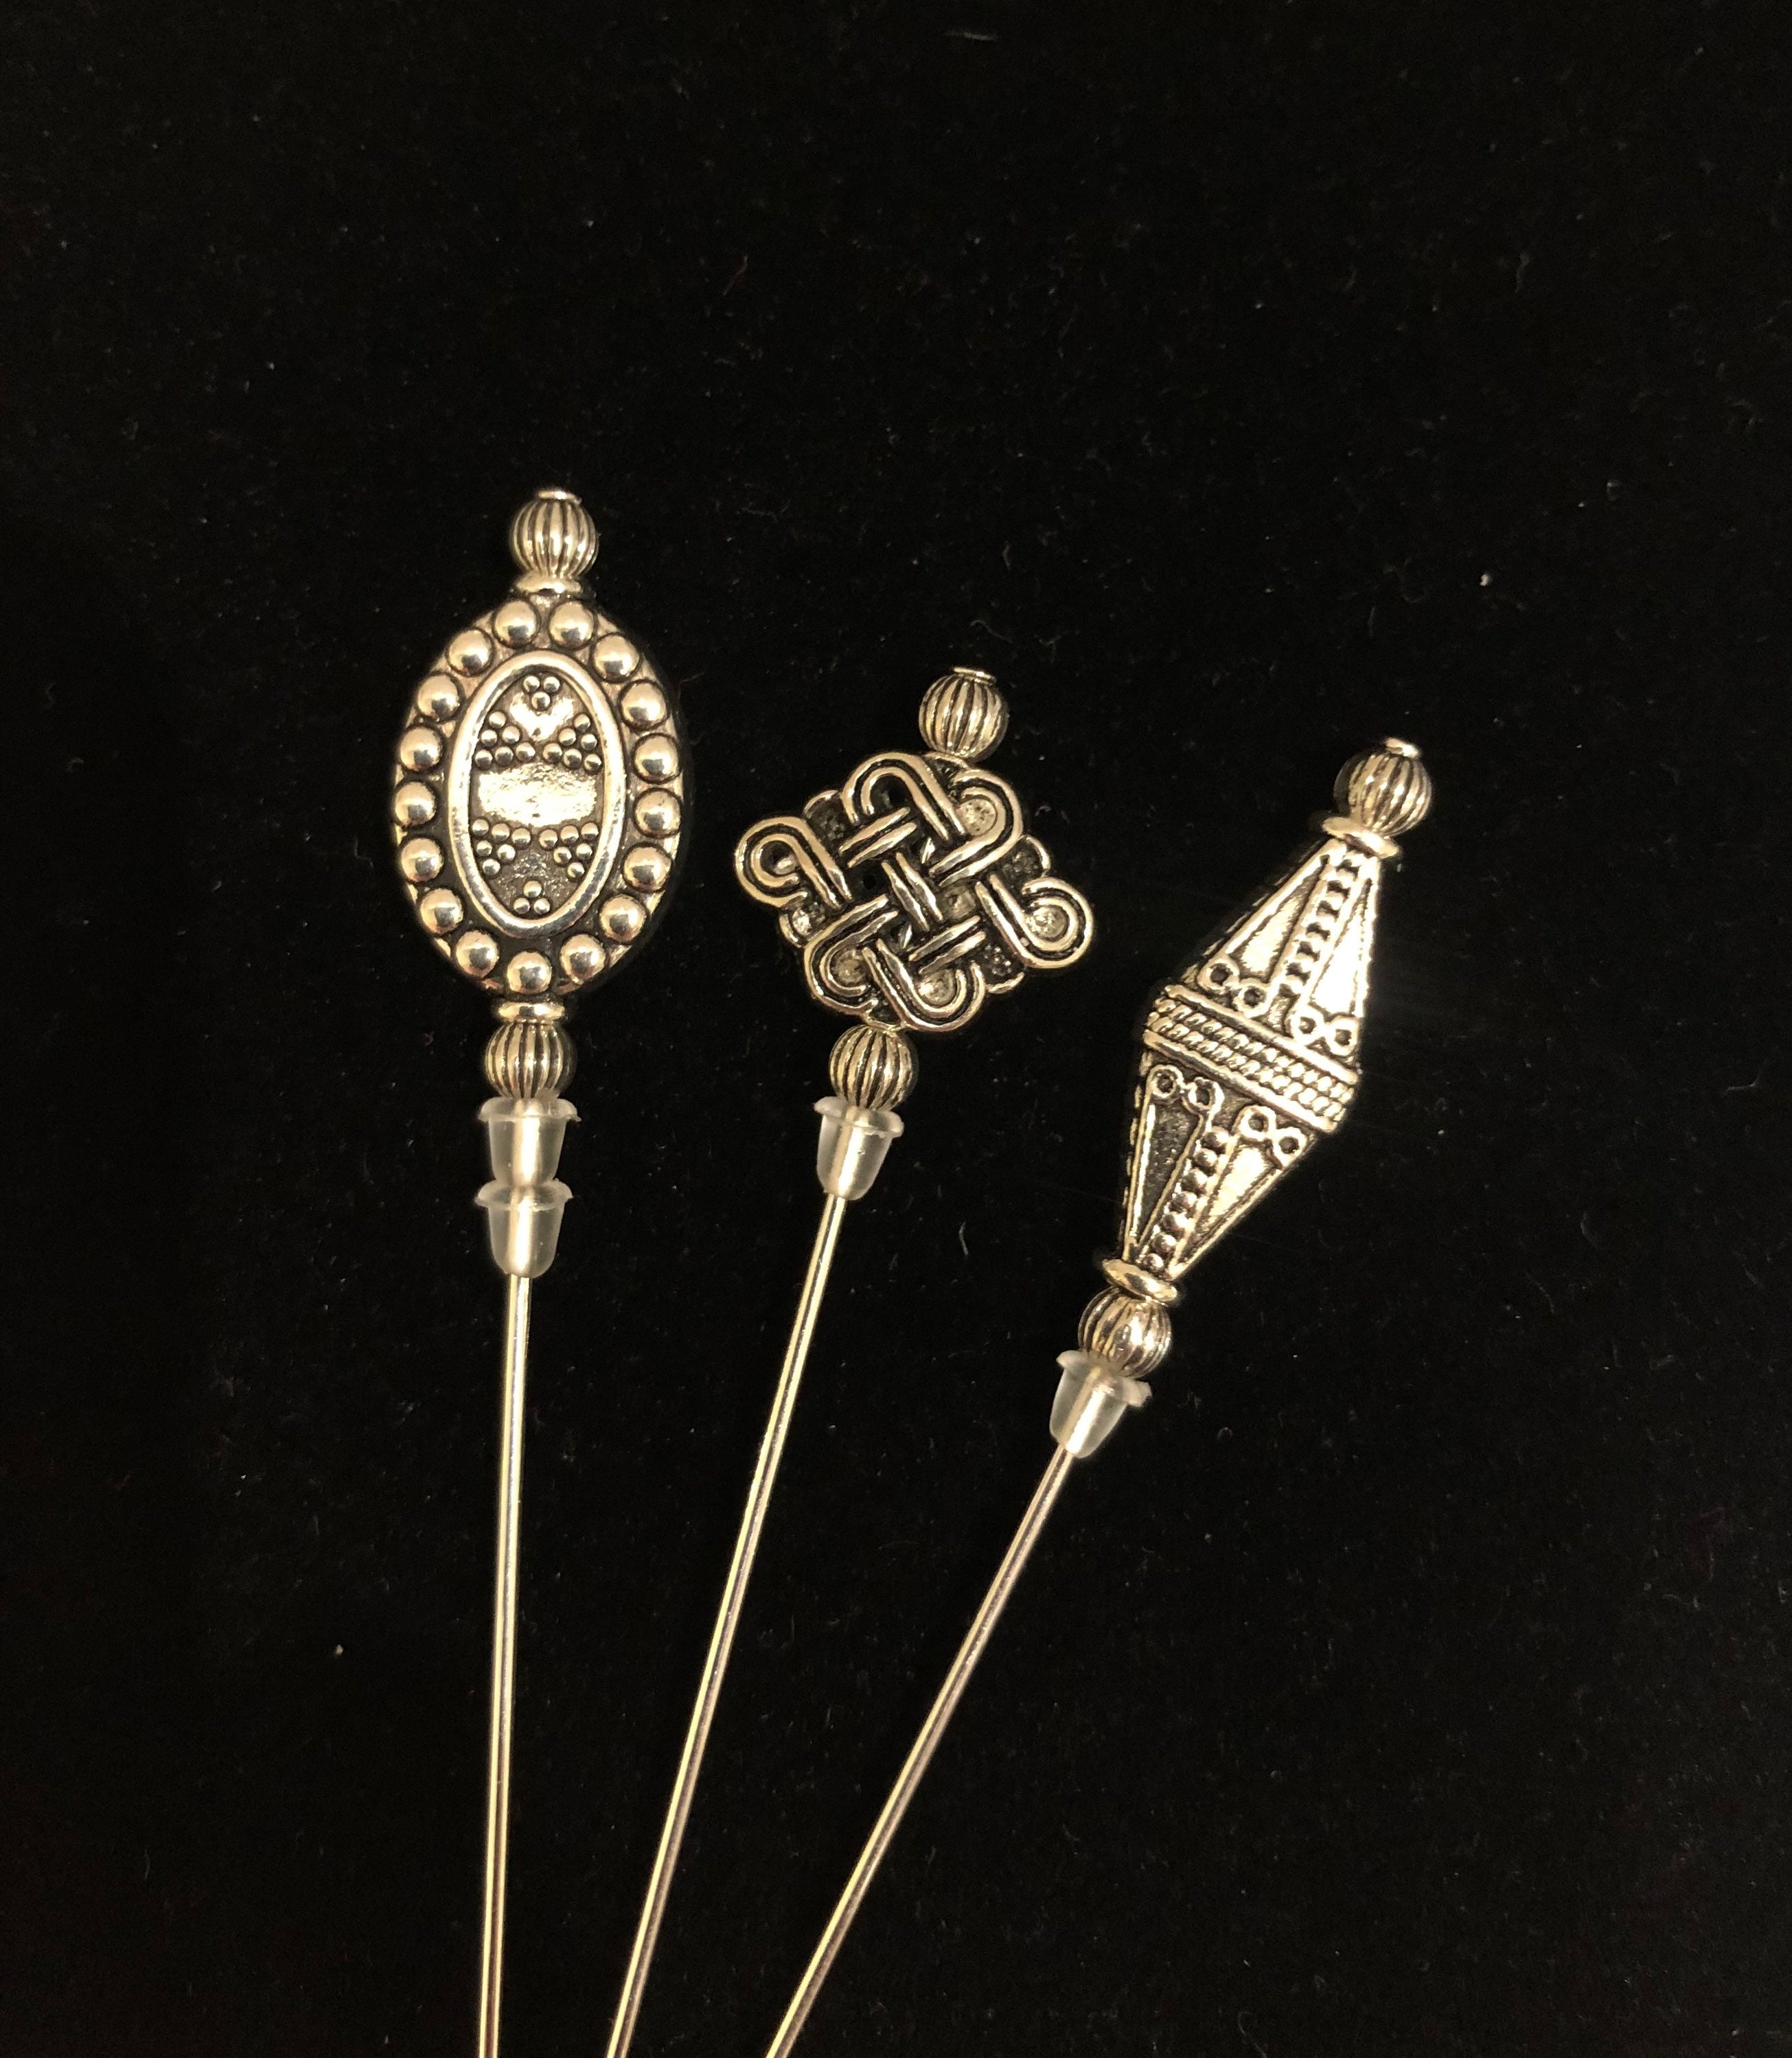 Hat Pins for women, Tibetan Silver hat pins. A selection of 3 beautiful  designs in a choice of lengths, Summer hats